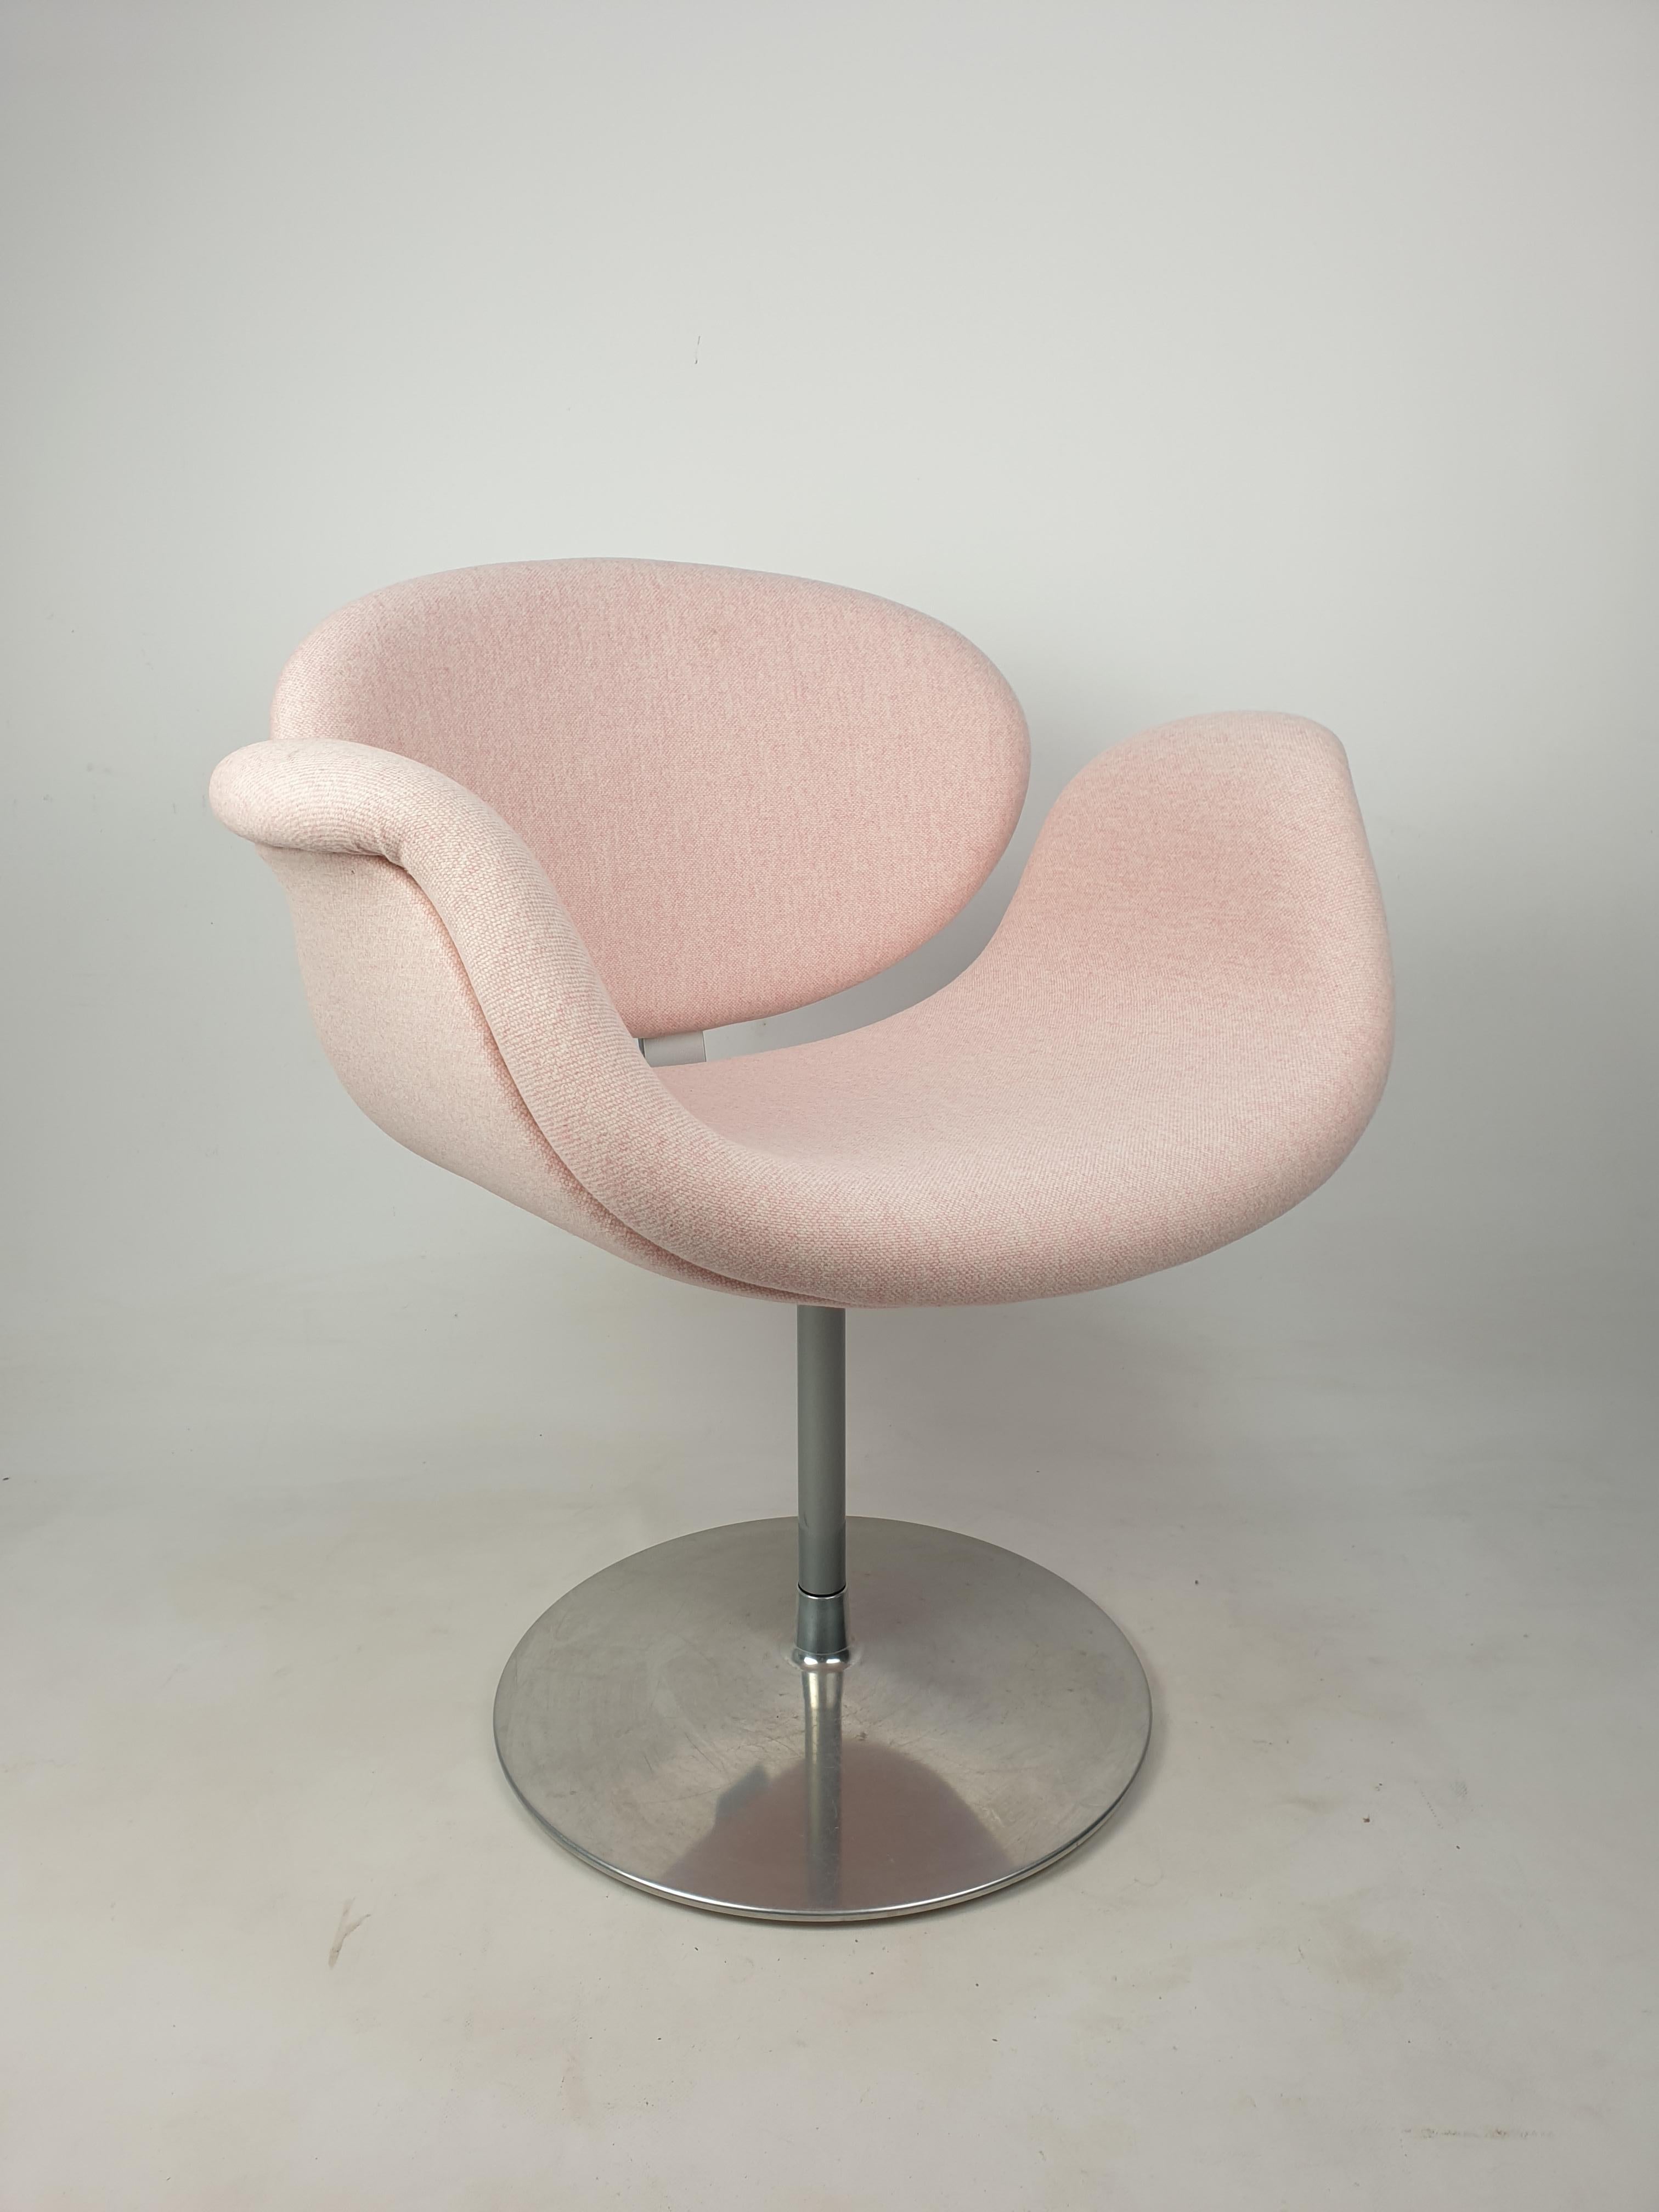 Cute and very comfortable pivoting armchair, designed by the famous Pierre Paulin in the 60's. Fabricated by Artifort in the 80's. Solid round metal base with a wooden frame. The chairs are just upholstered with new foam and new lovely and high